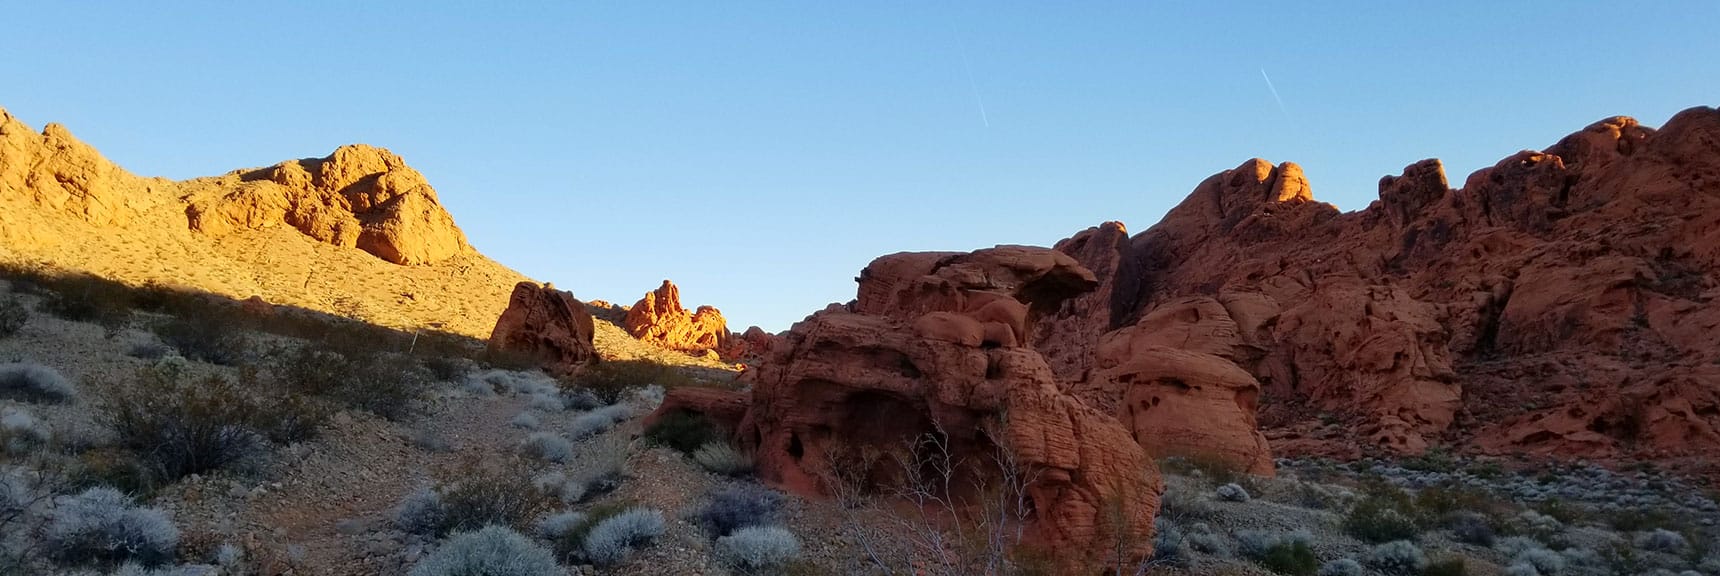 Ascending Through the Pass on Prospect Trail in Valley of Fire State Park, Nevada